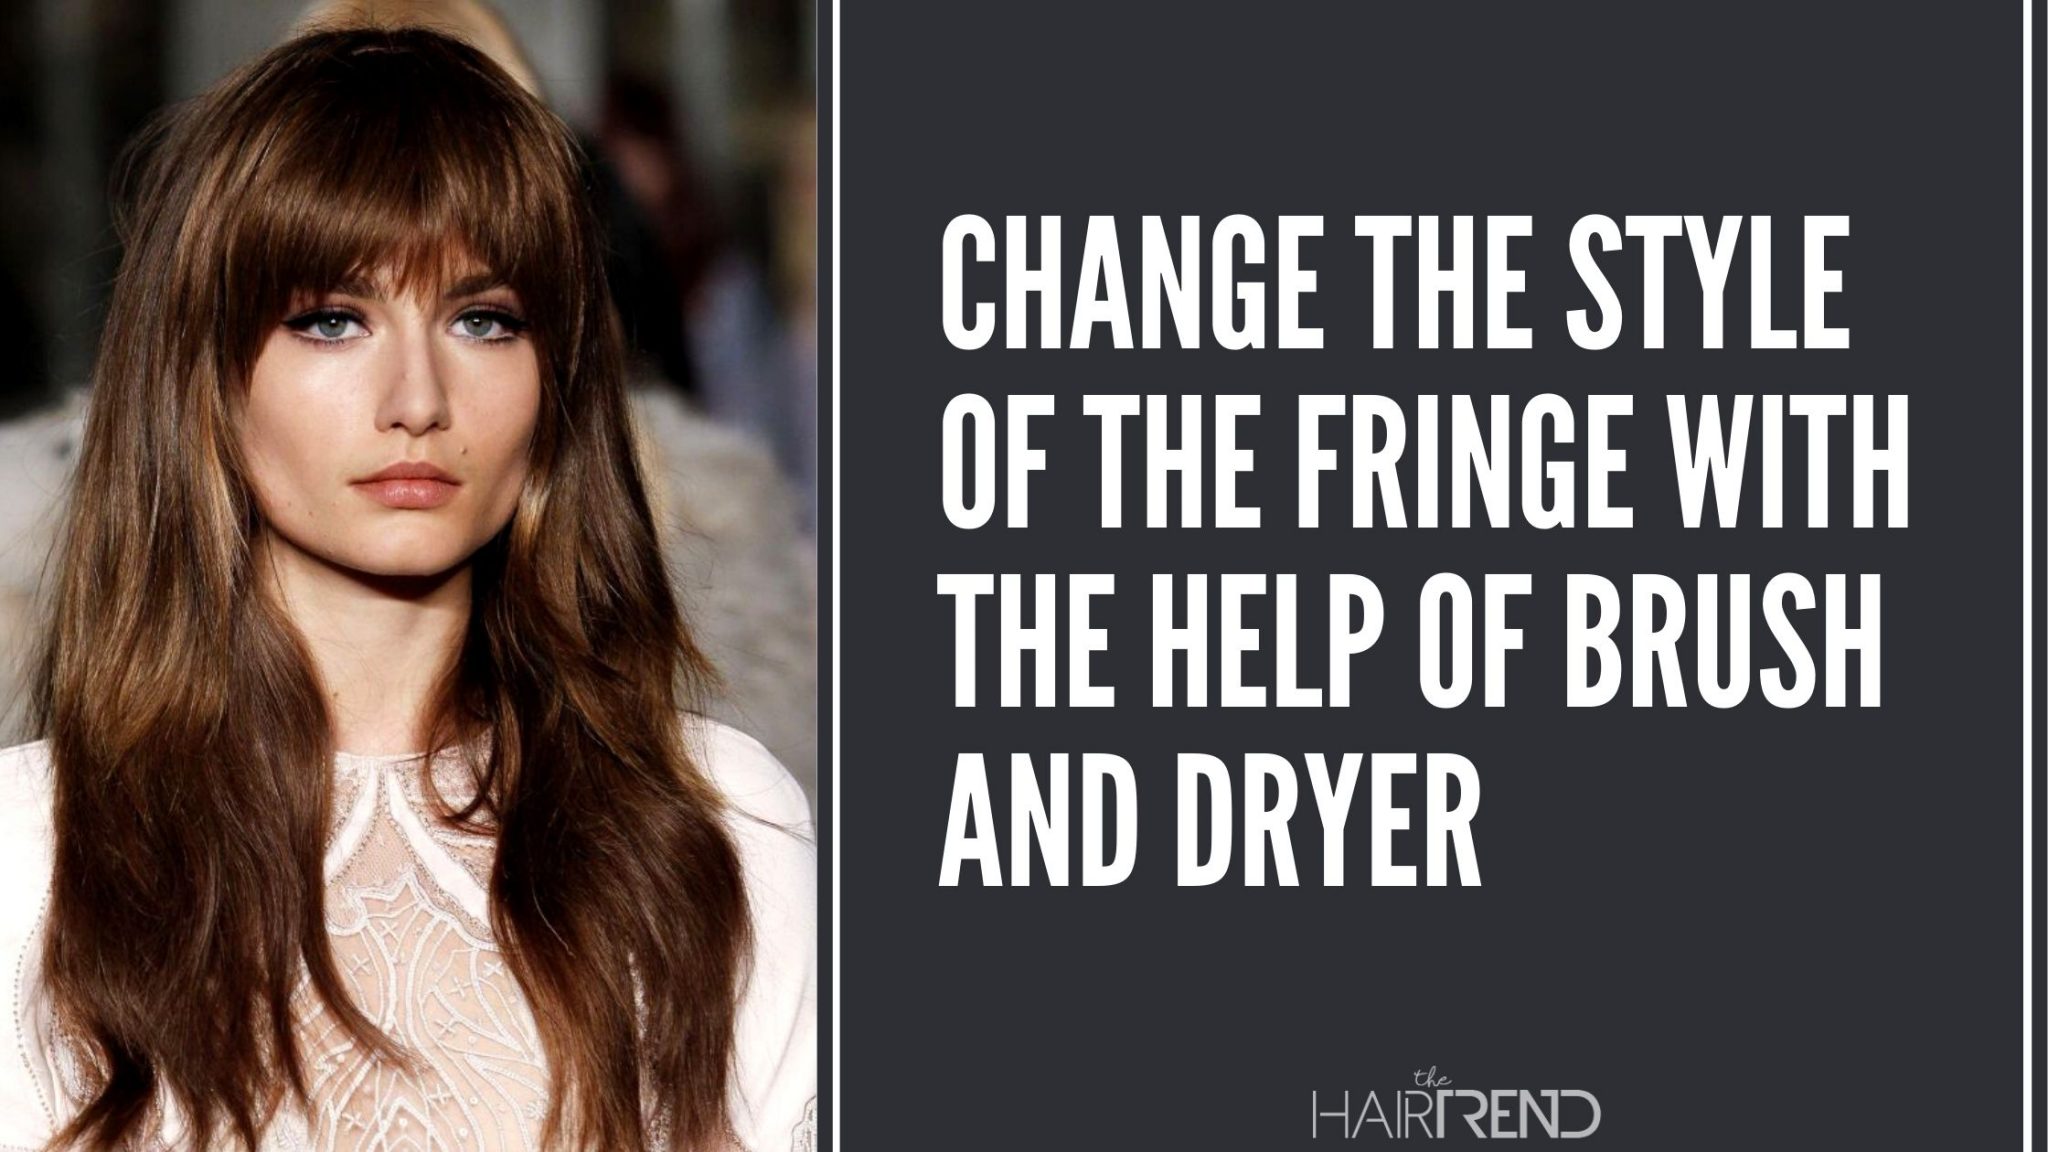 CHANGE THE STYLE OF THE FRINGE WITH THE HELP OF BRUSH AND DRYER